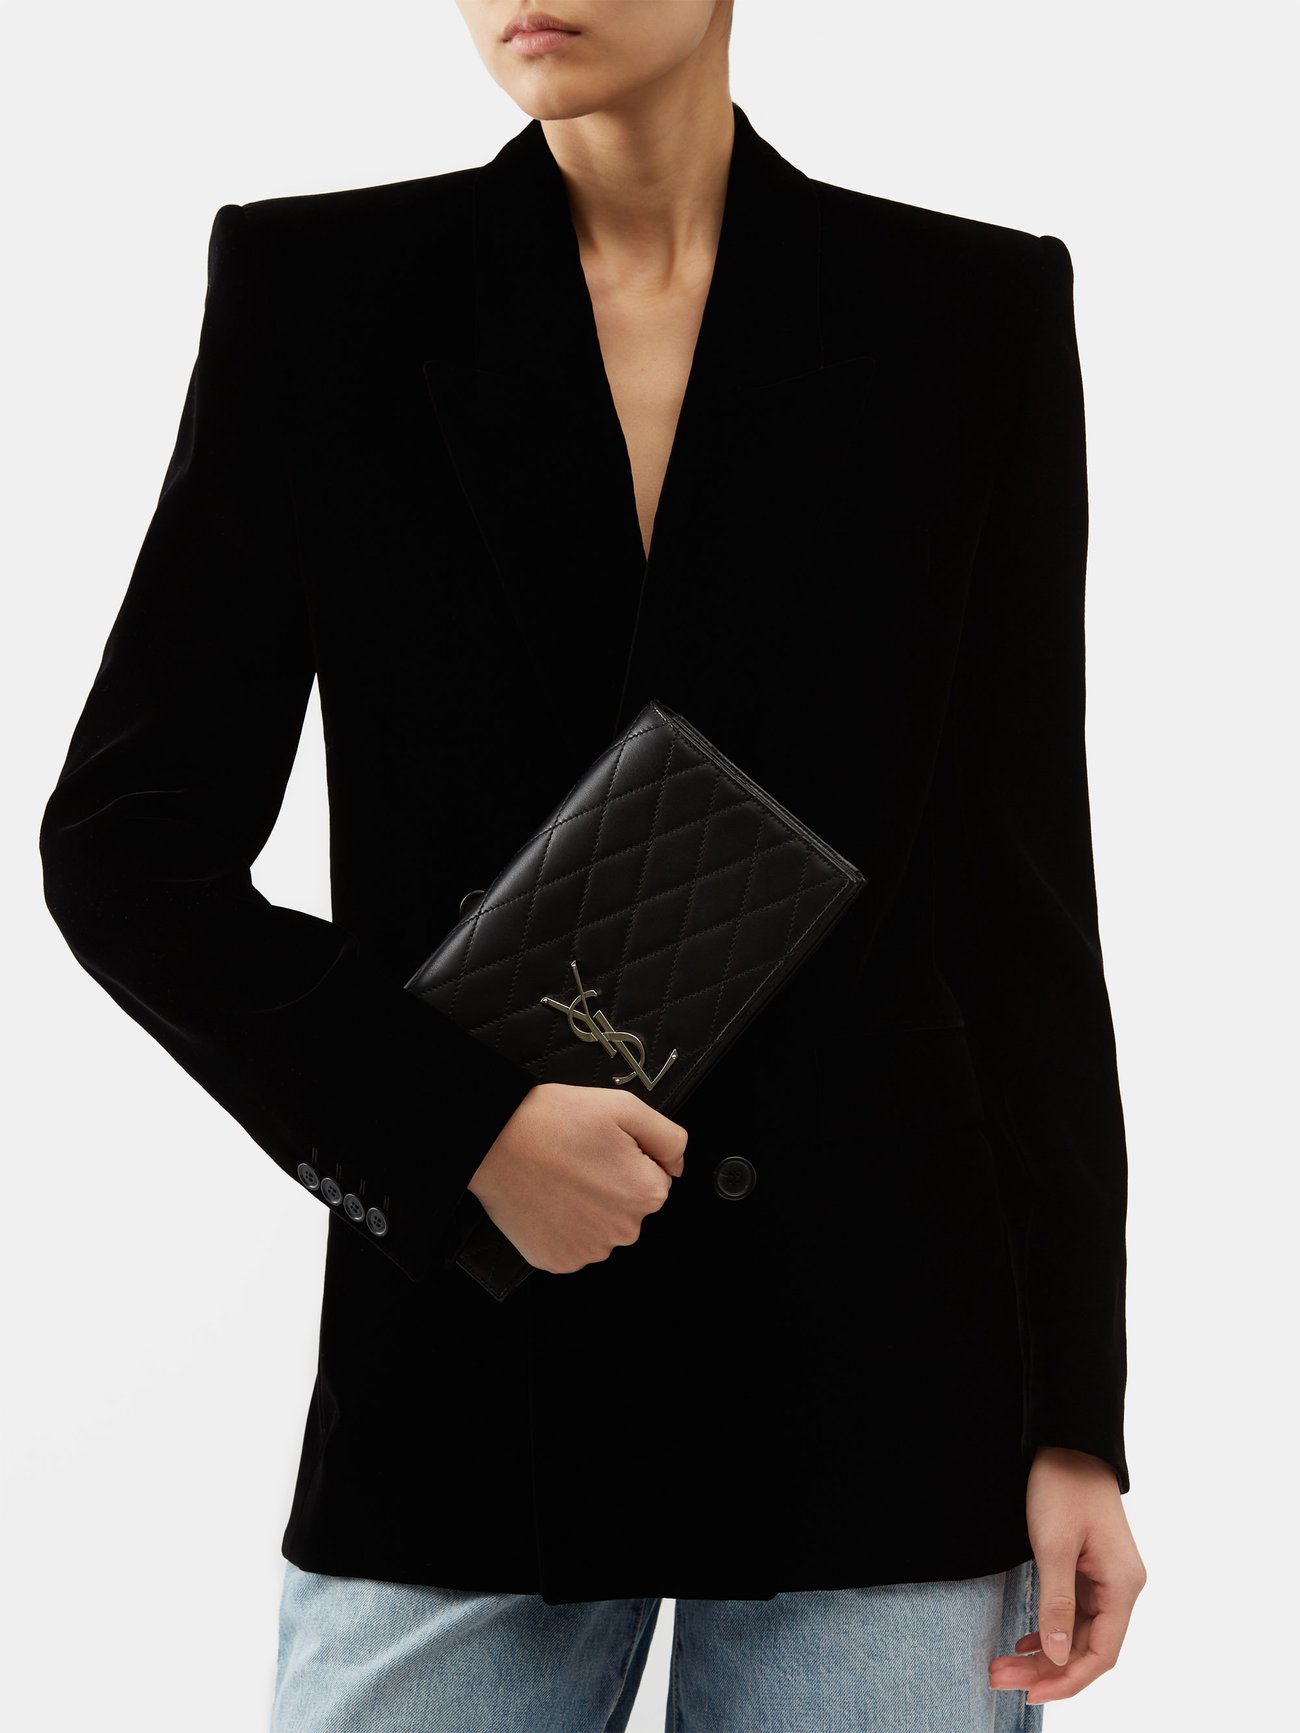 Saint Laurent Kate Quilted Leather Clutch Black Female